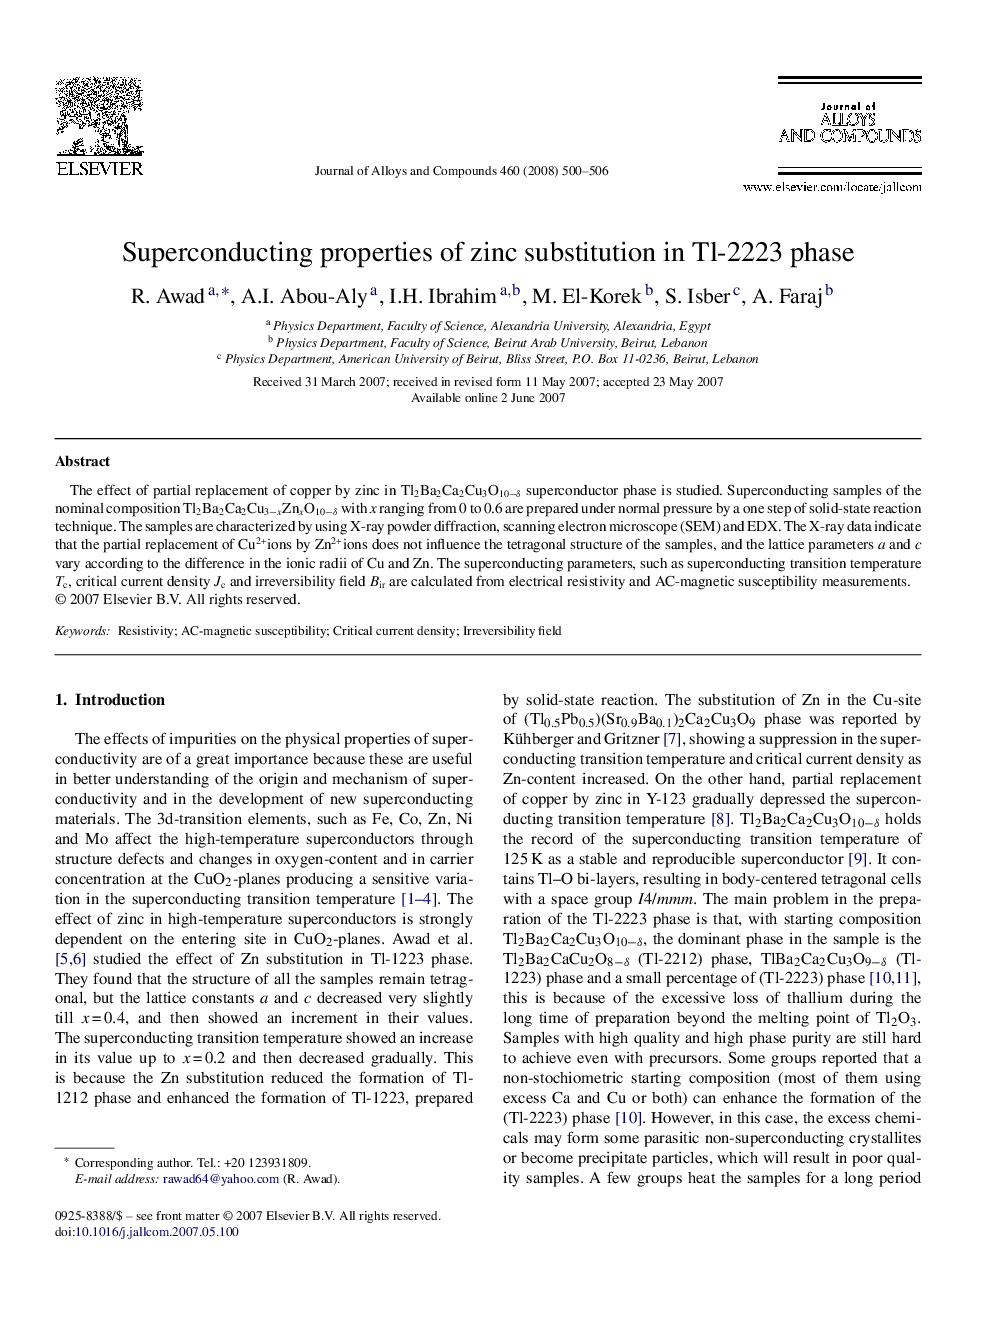 Superconducting properties of zinc substitution in Tl-2223 phase